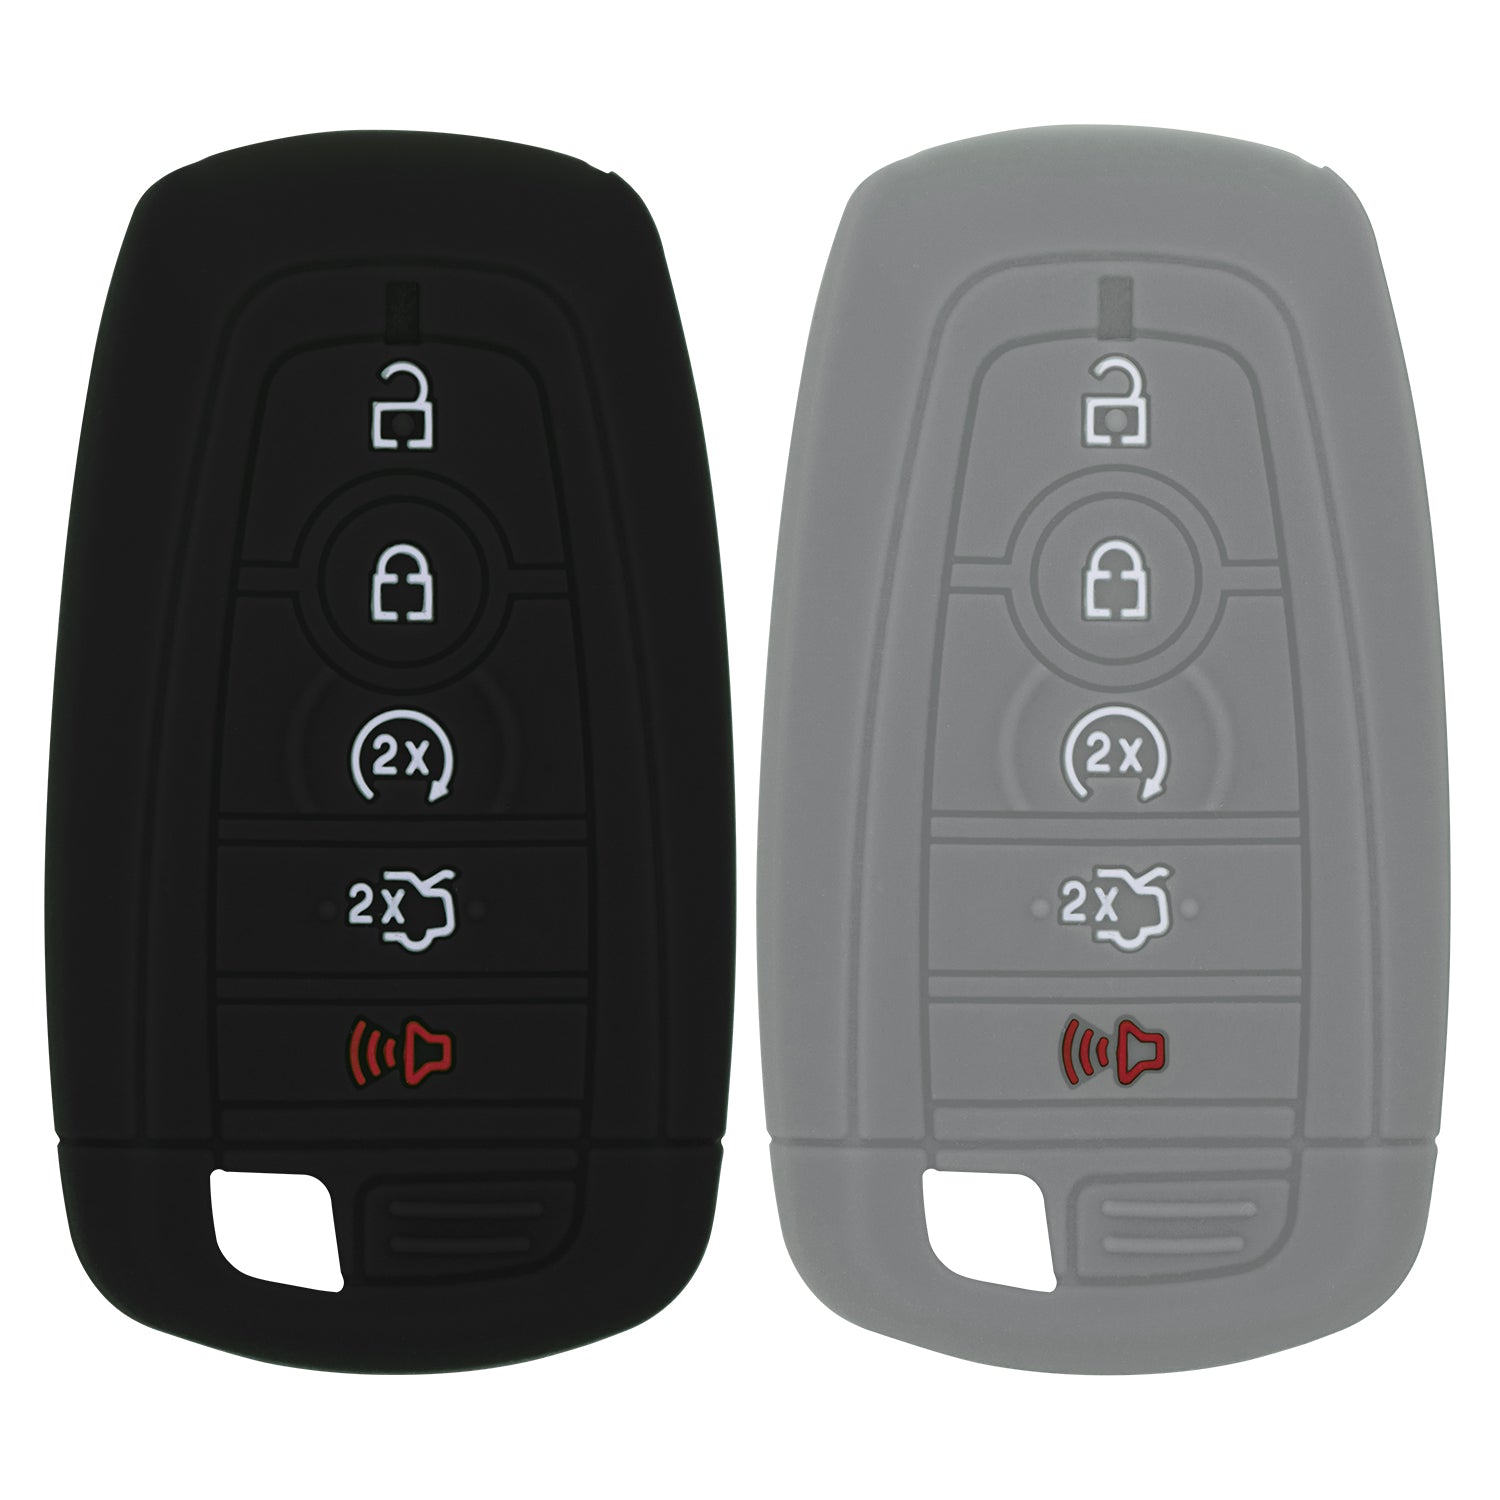 Silicone Case for Smart Key Remote Keyless Entry for Ford Fusion Explorer Edge Mustang Expedition M3N-A2C93142600 164-R8149 164R8149 R8149 (Black & Grey)